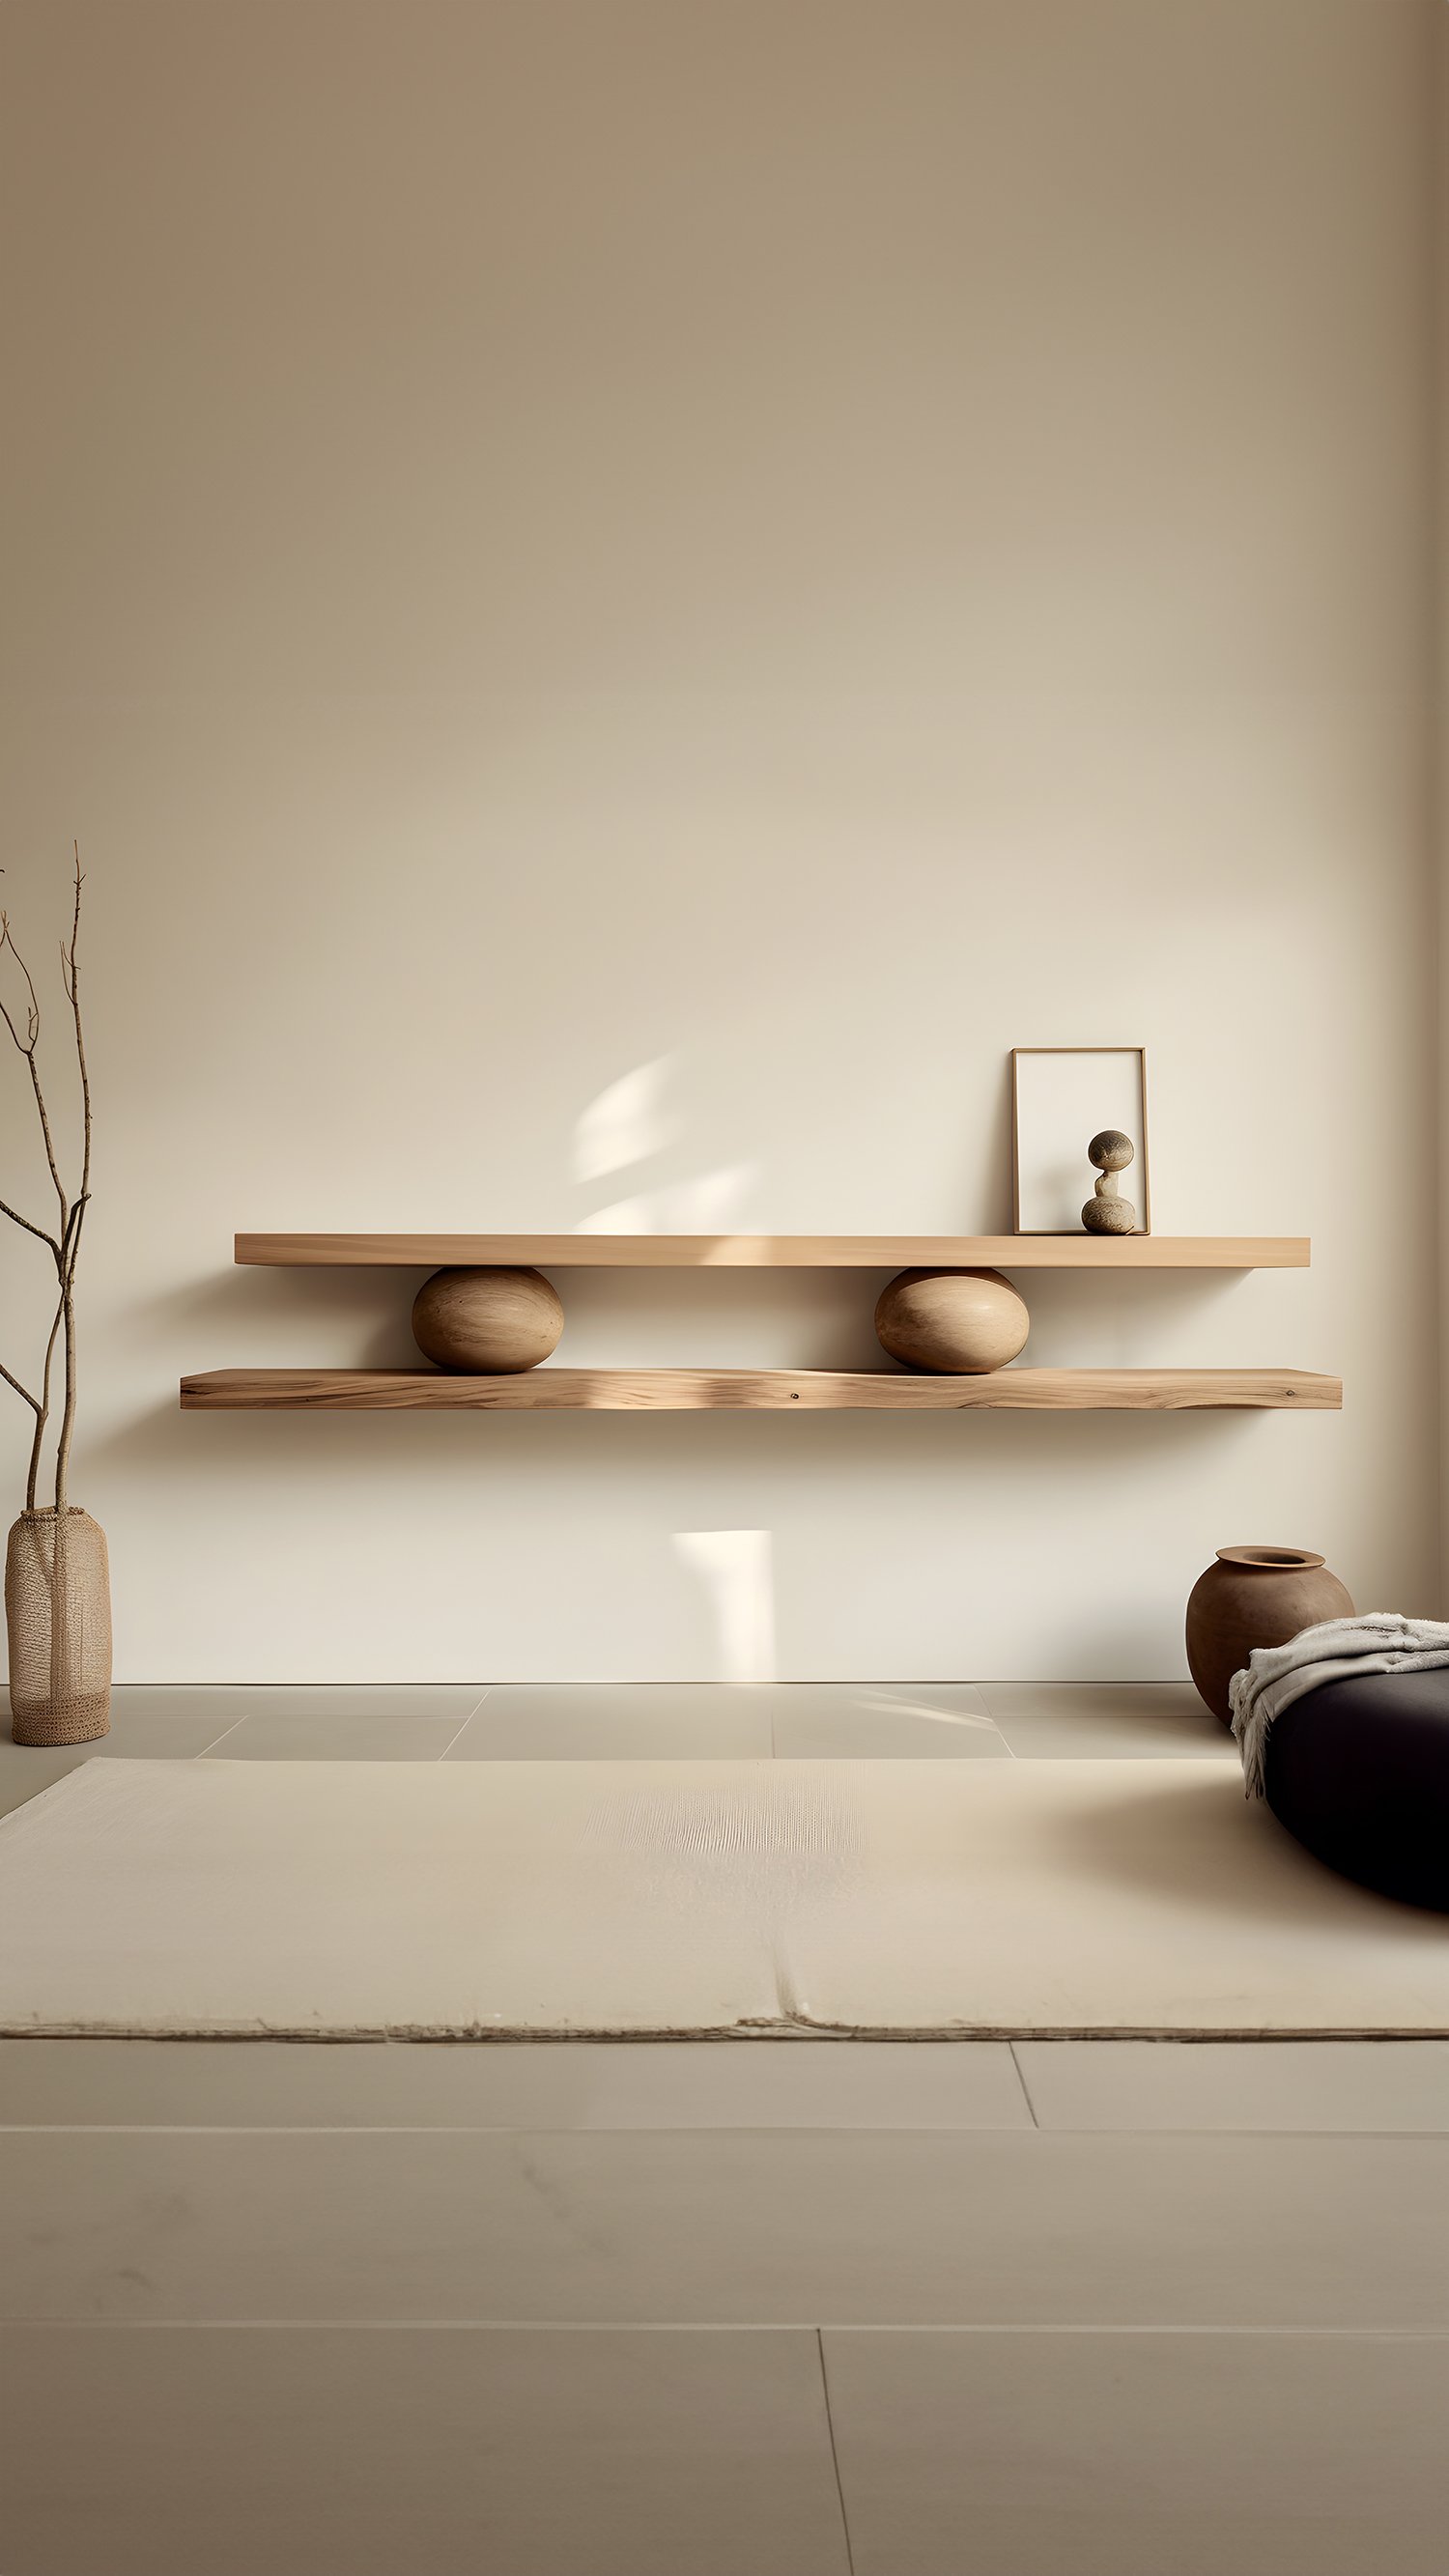 Set of Two Large Floating Shelves with Two Sculptural Wooden Pebble Accents in the Middle, Sereno by Joel Escalona — 5.jpg